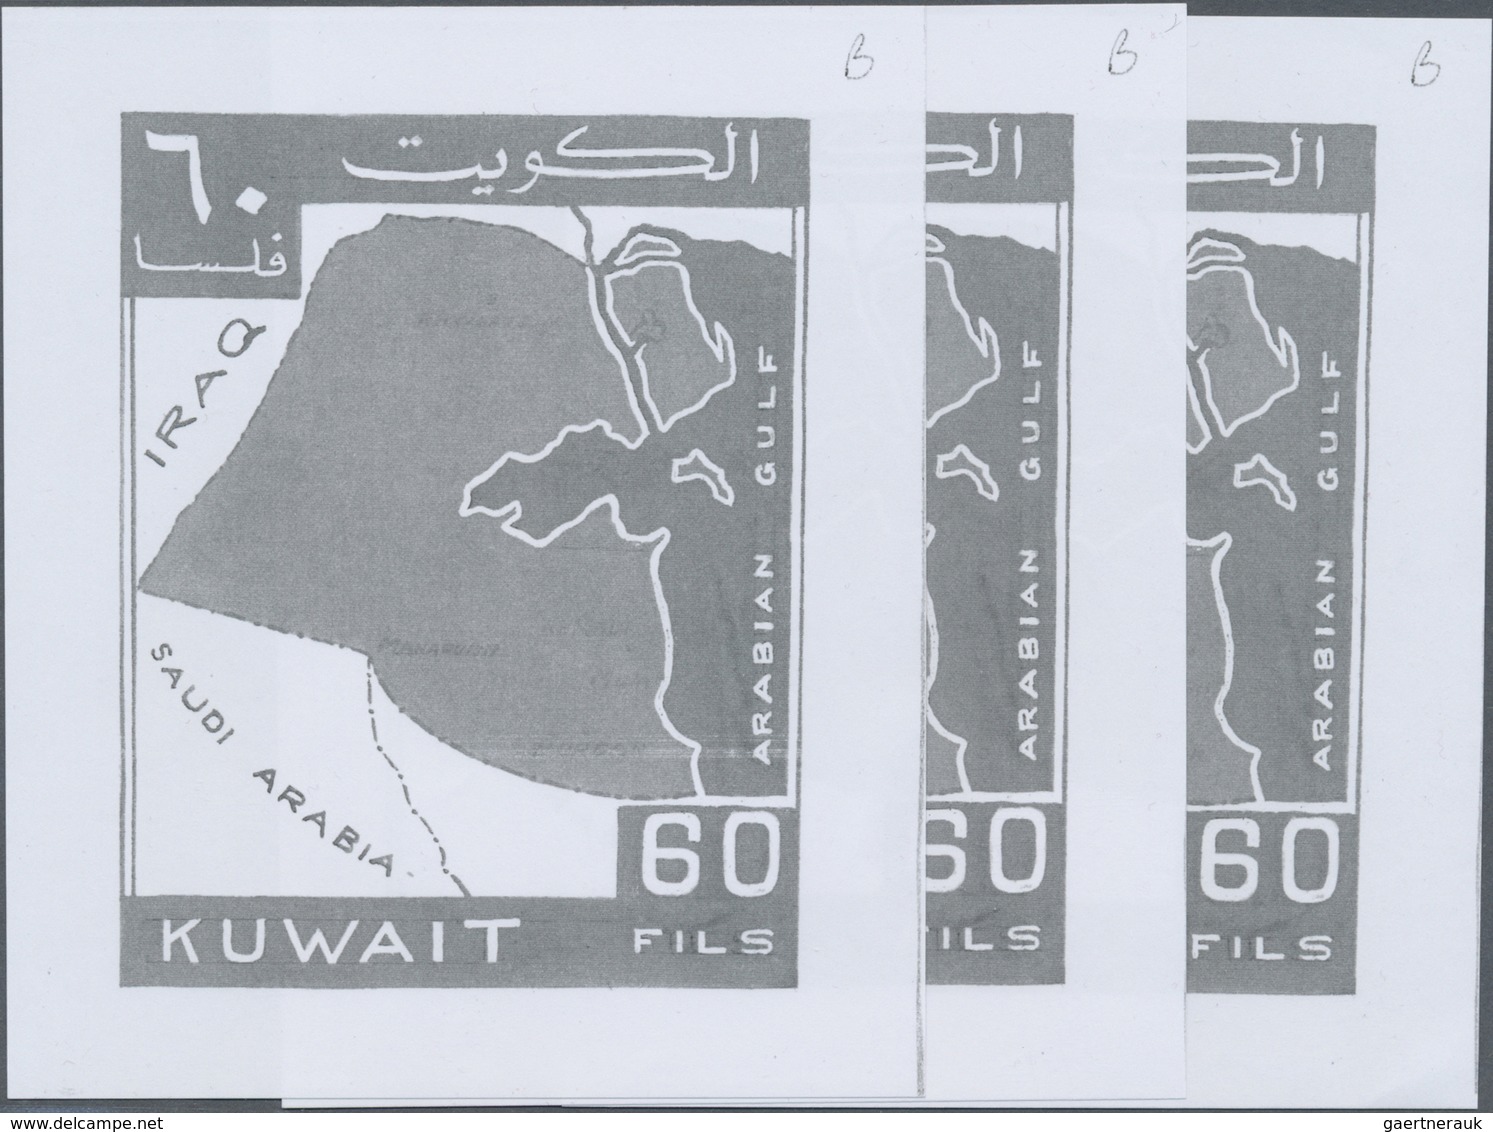 Kuwait: 1960. Lot of 9 different black and white ESSAY PHOTOS (several times each) with the correspo